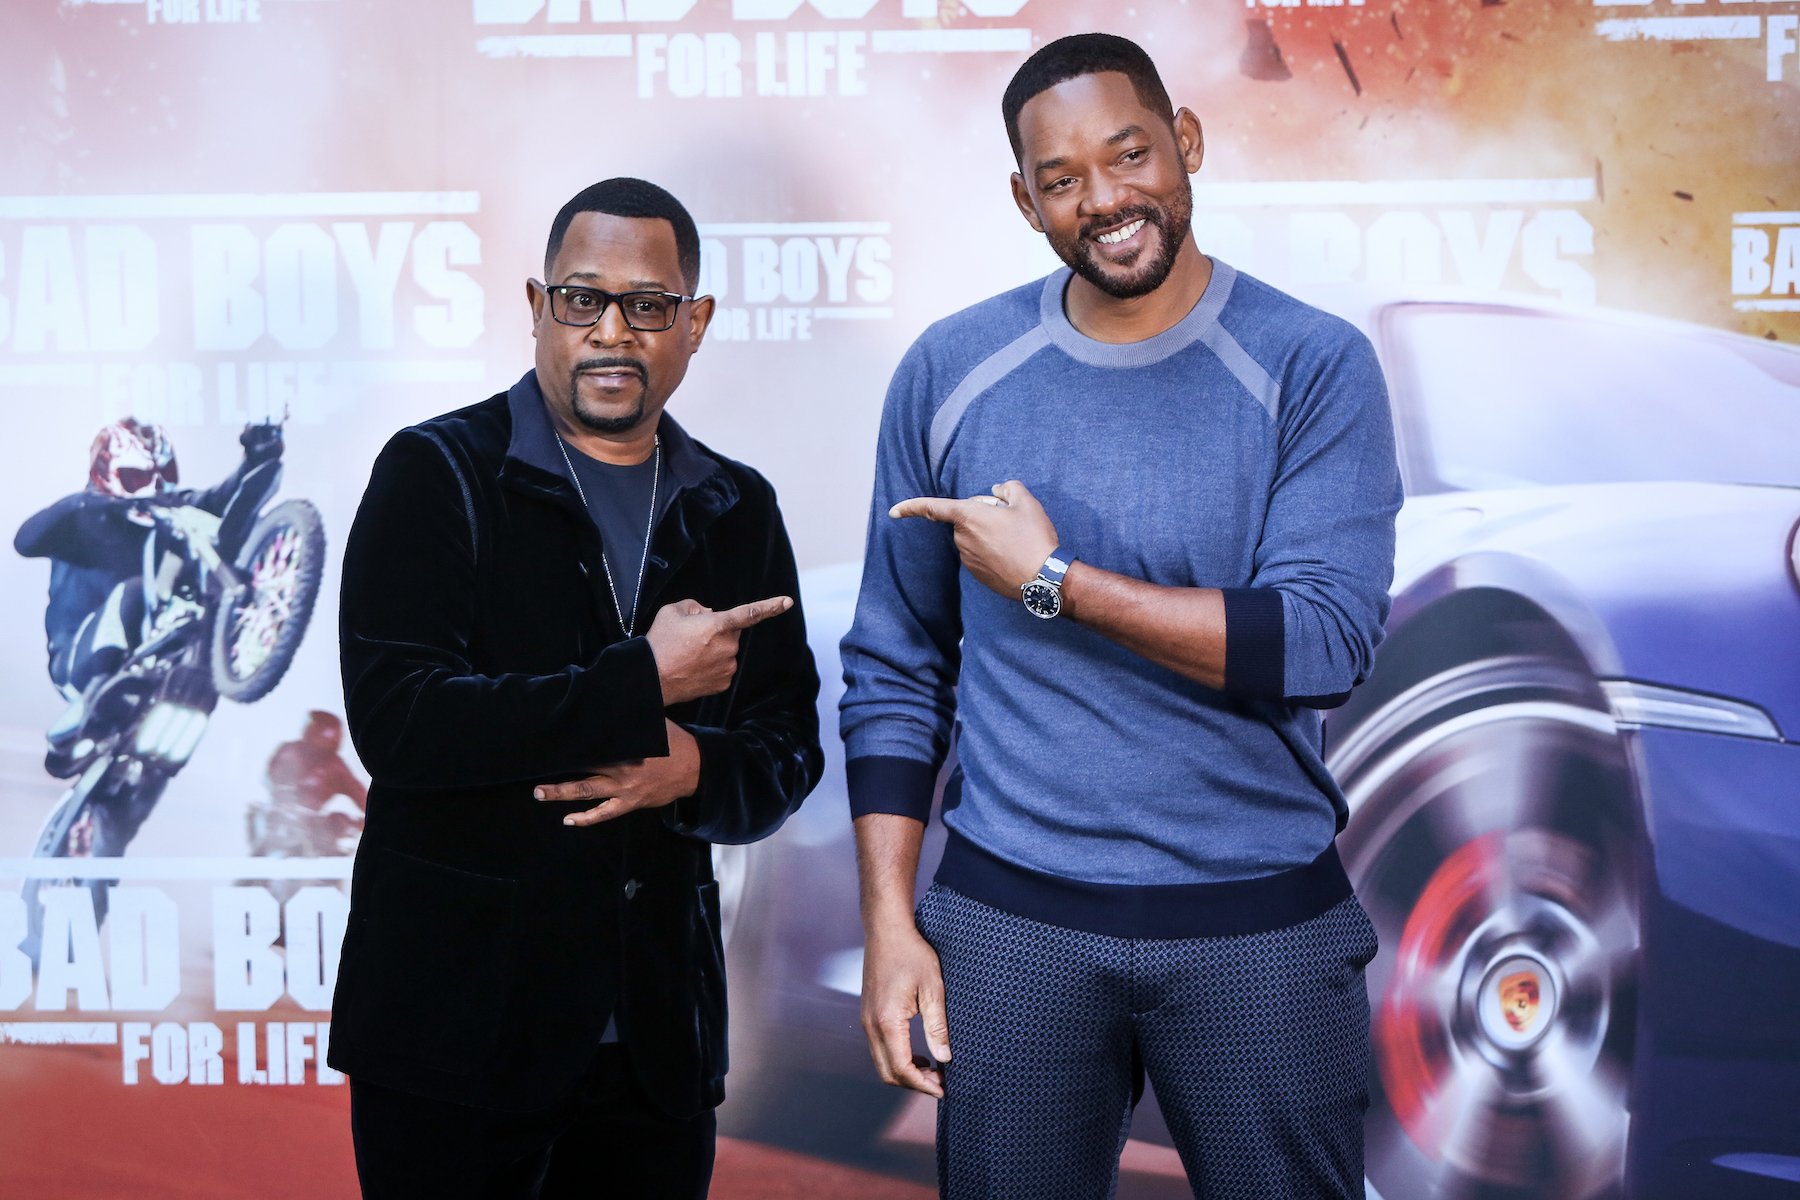 Martin Lawrence and Will Smith smiling and standing side by side as they attend the 'Bad Boys For Life' photo call in 2020